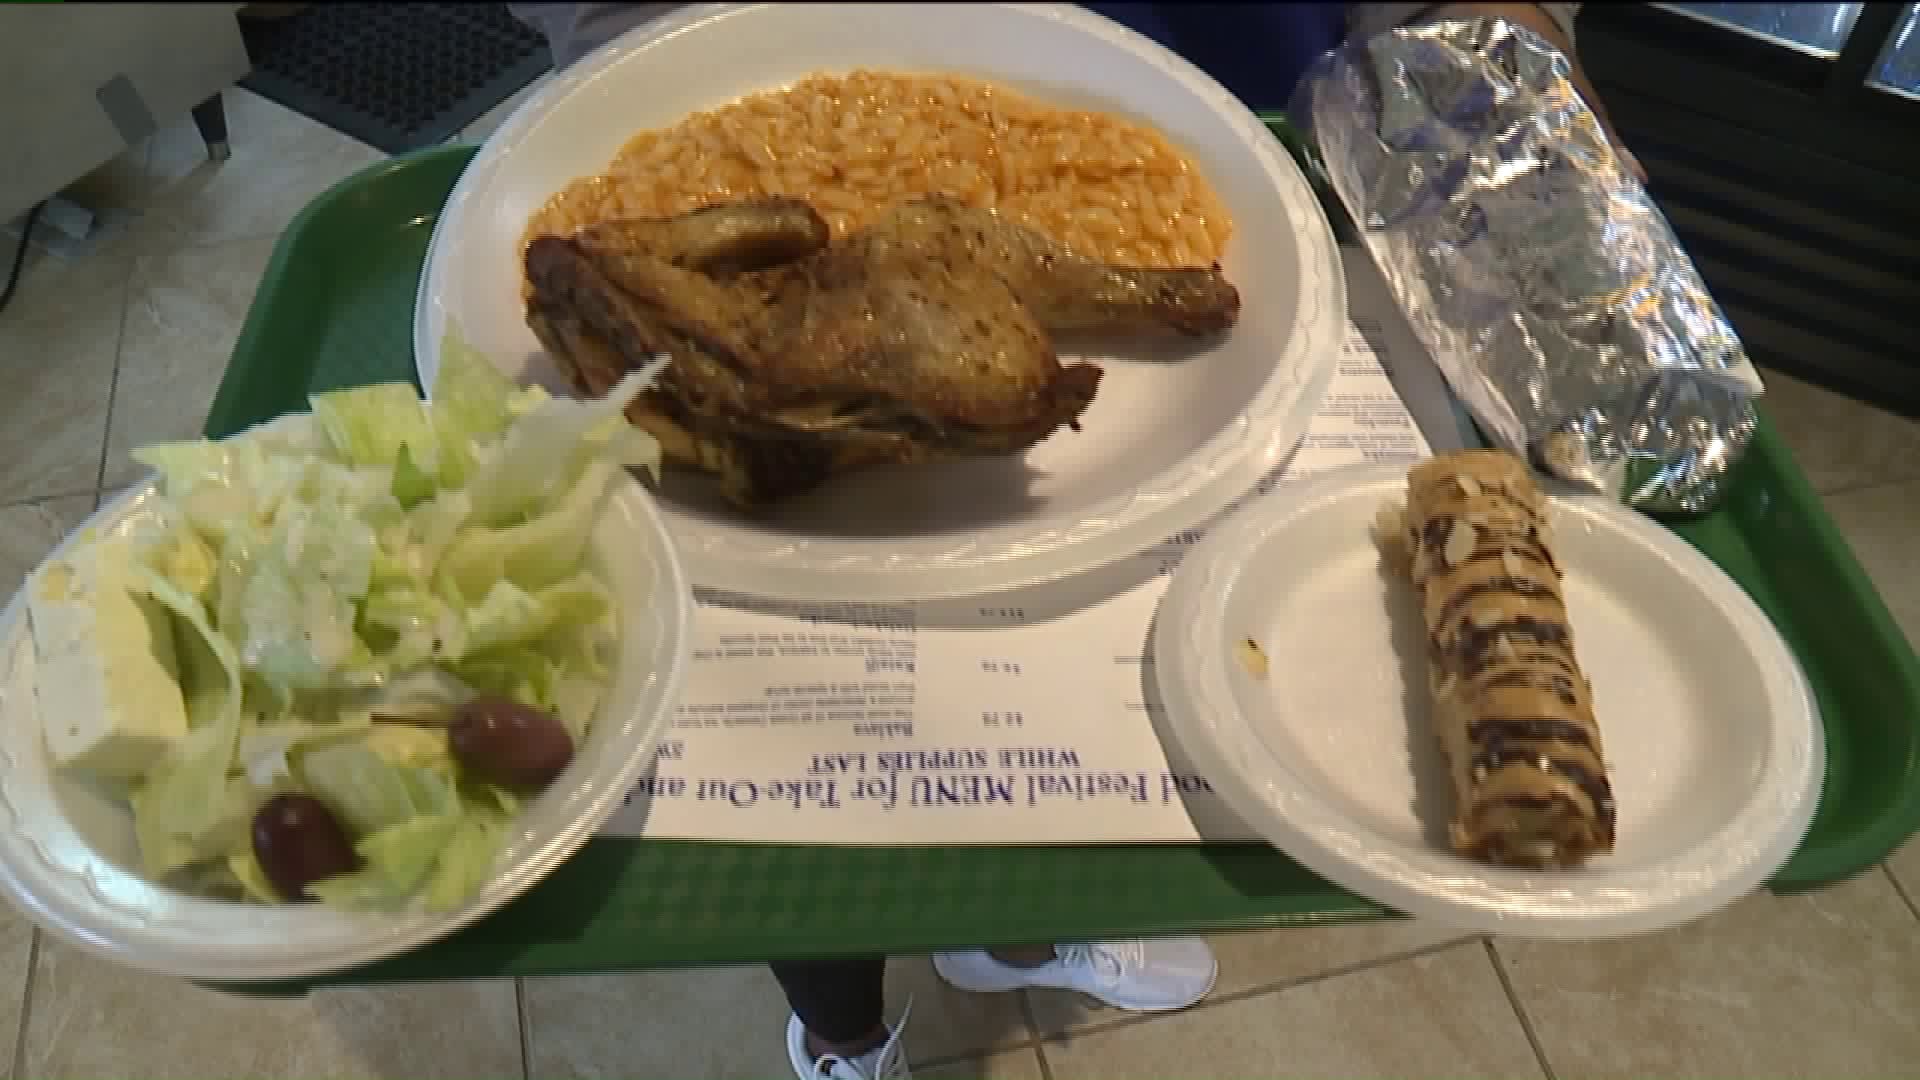 Greek Food Festival Back for Another Year